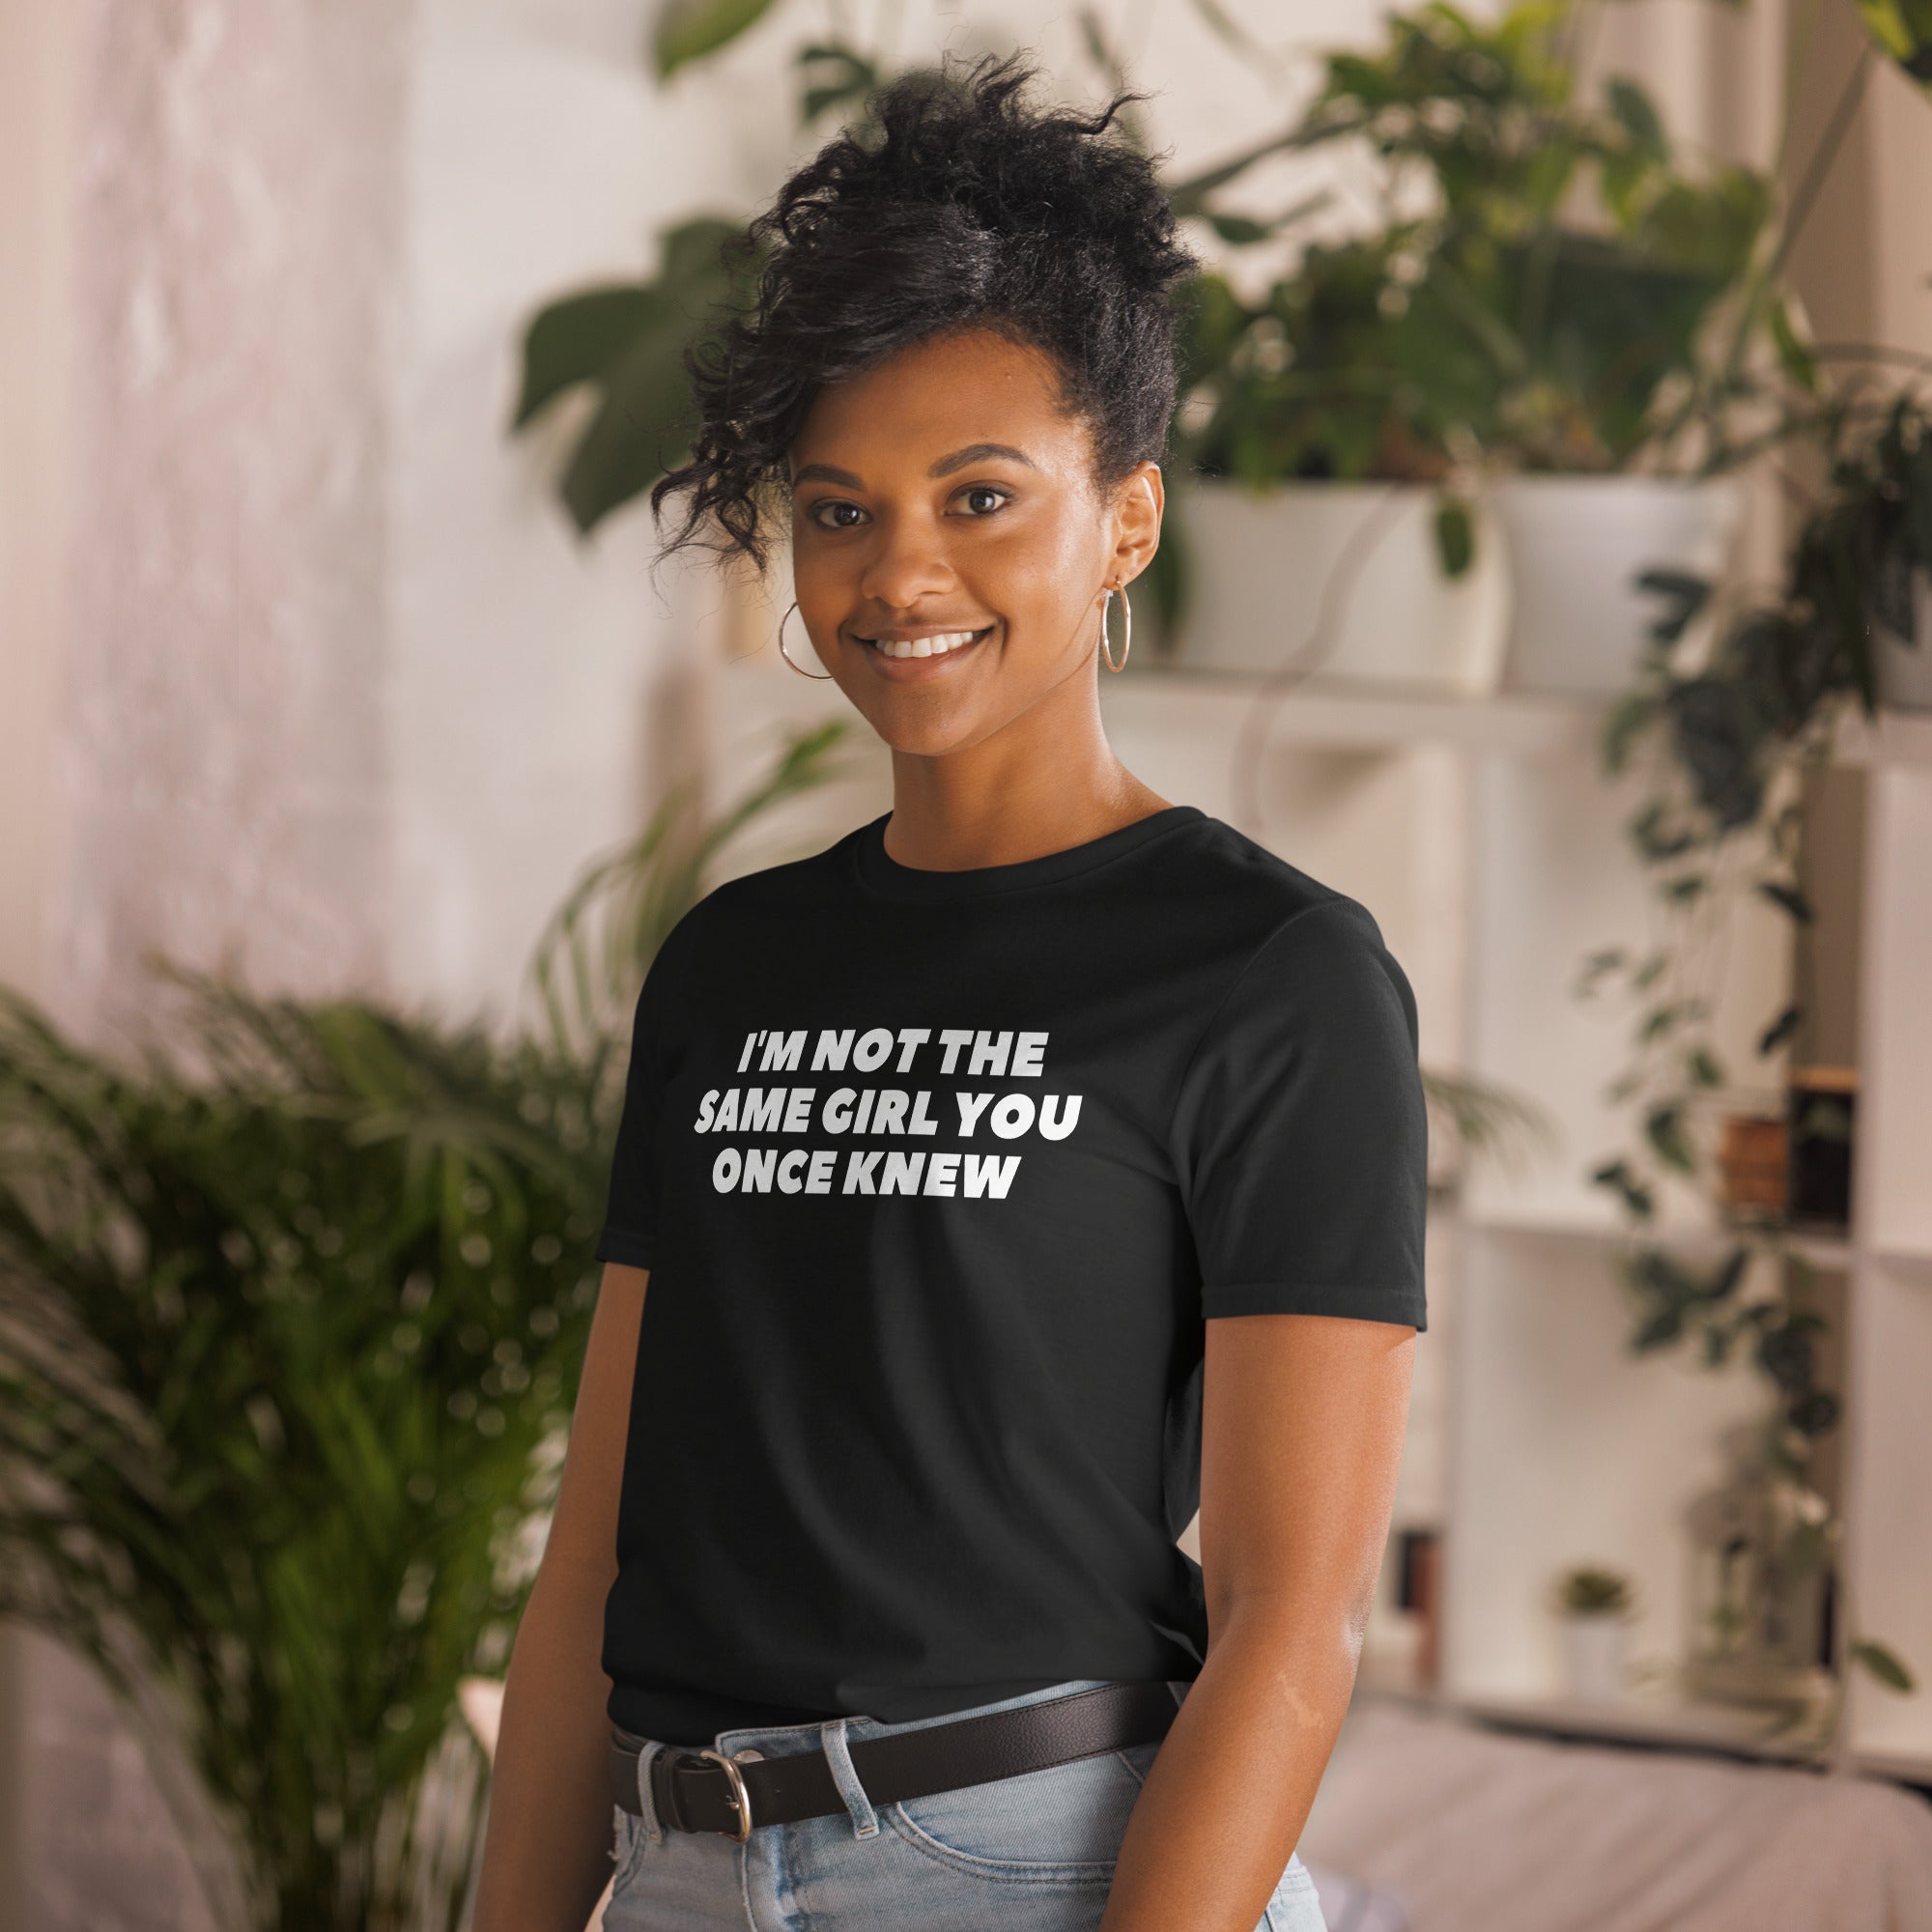 I'm Not The Same Girl You Once Knew Short-Sleeve Unisex T-Shirt